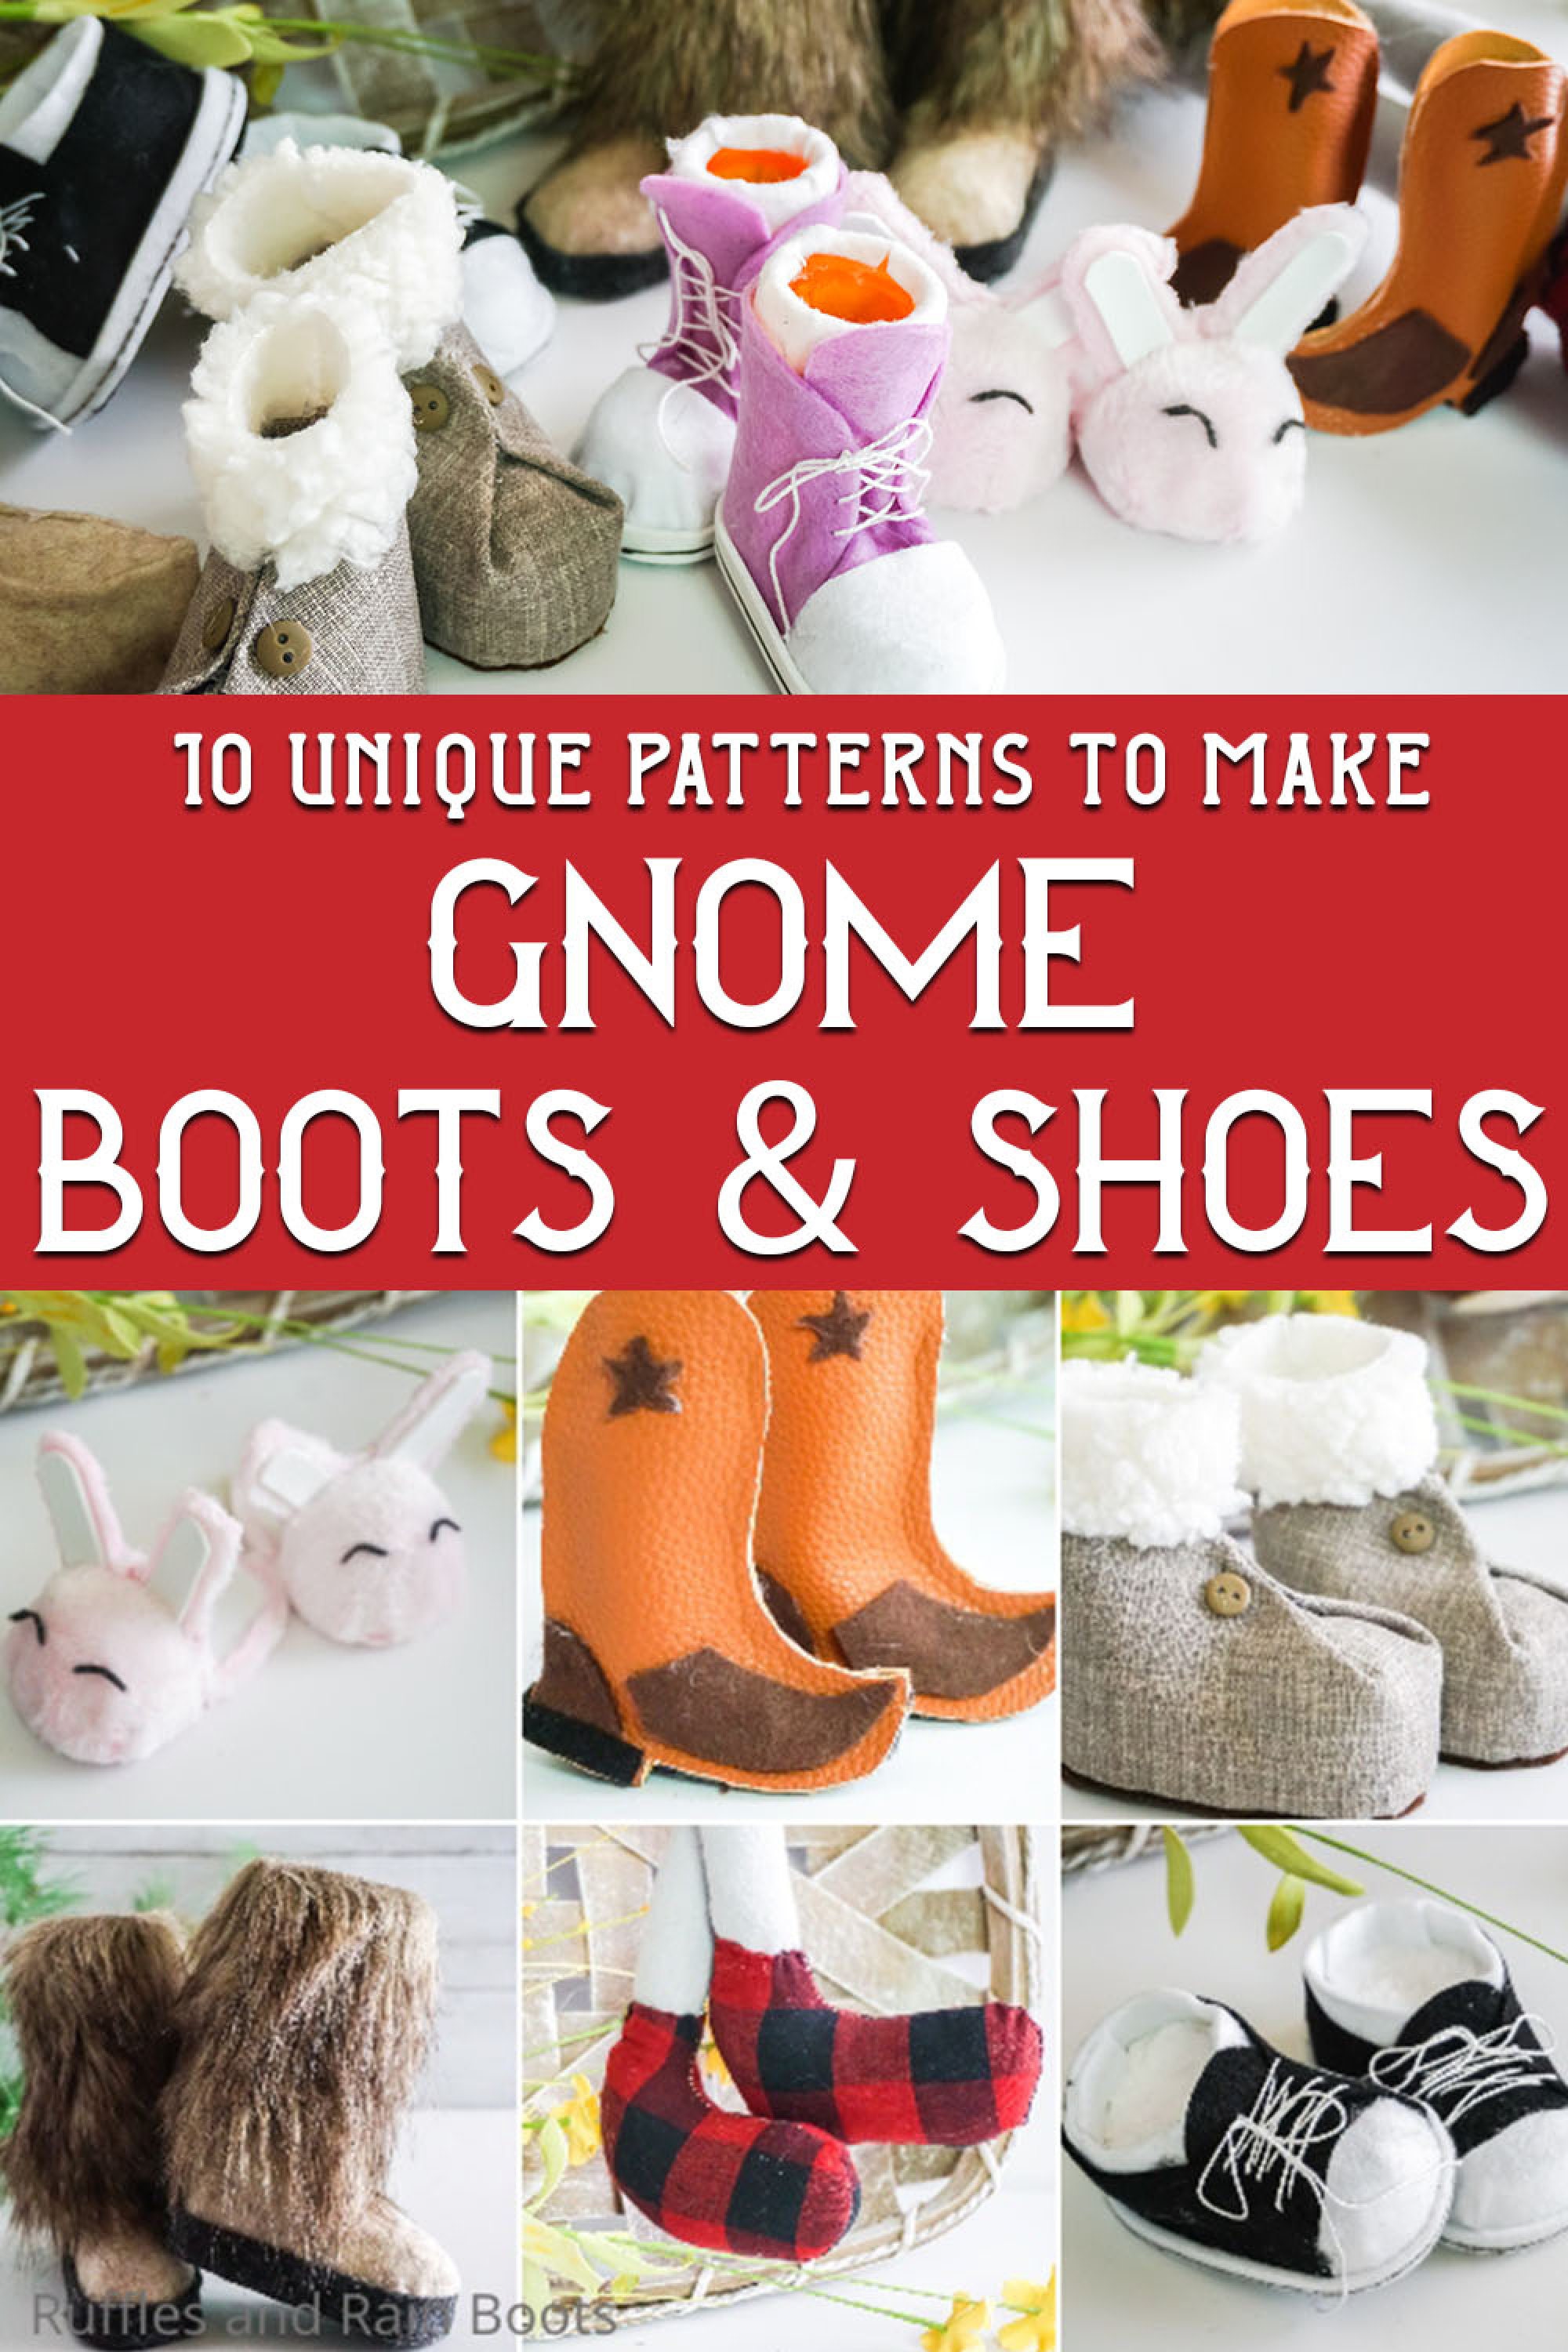 17 Gnome Boot and Shoe Patterns for Every Gnome Maker - Ruffles